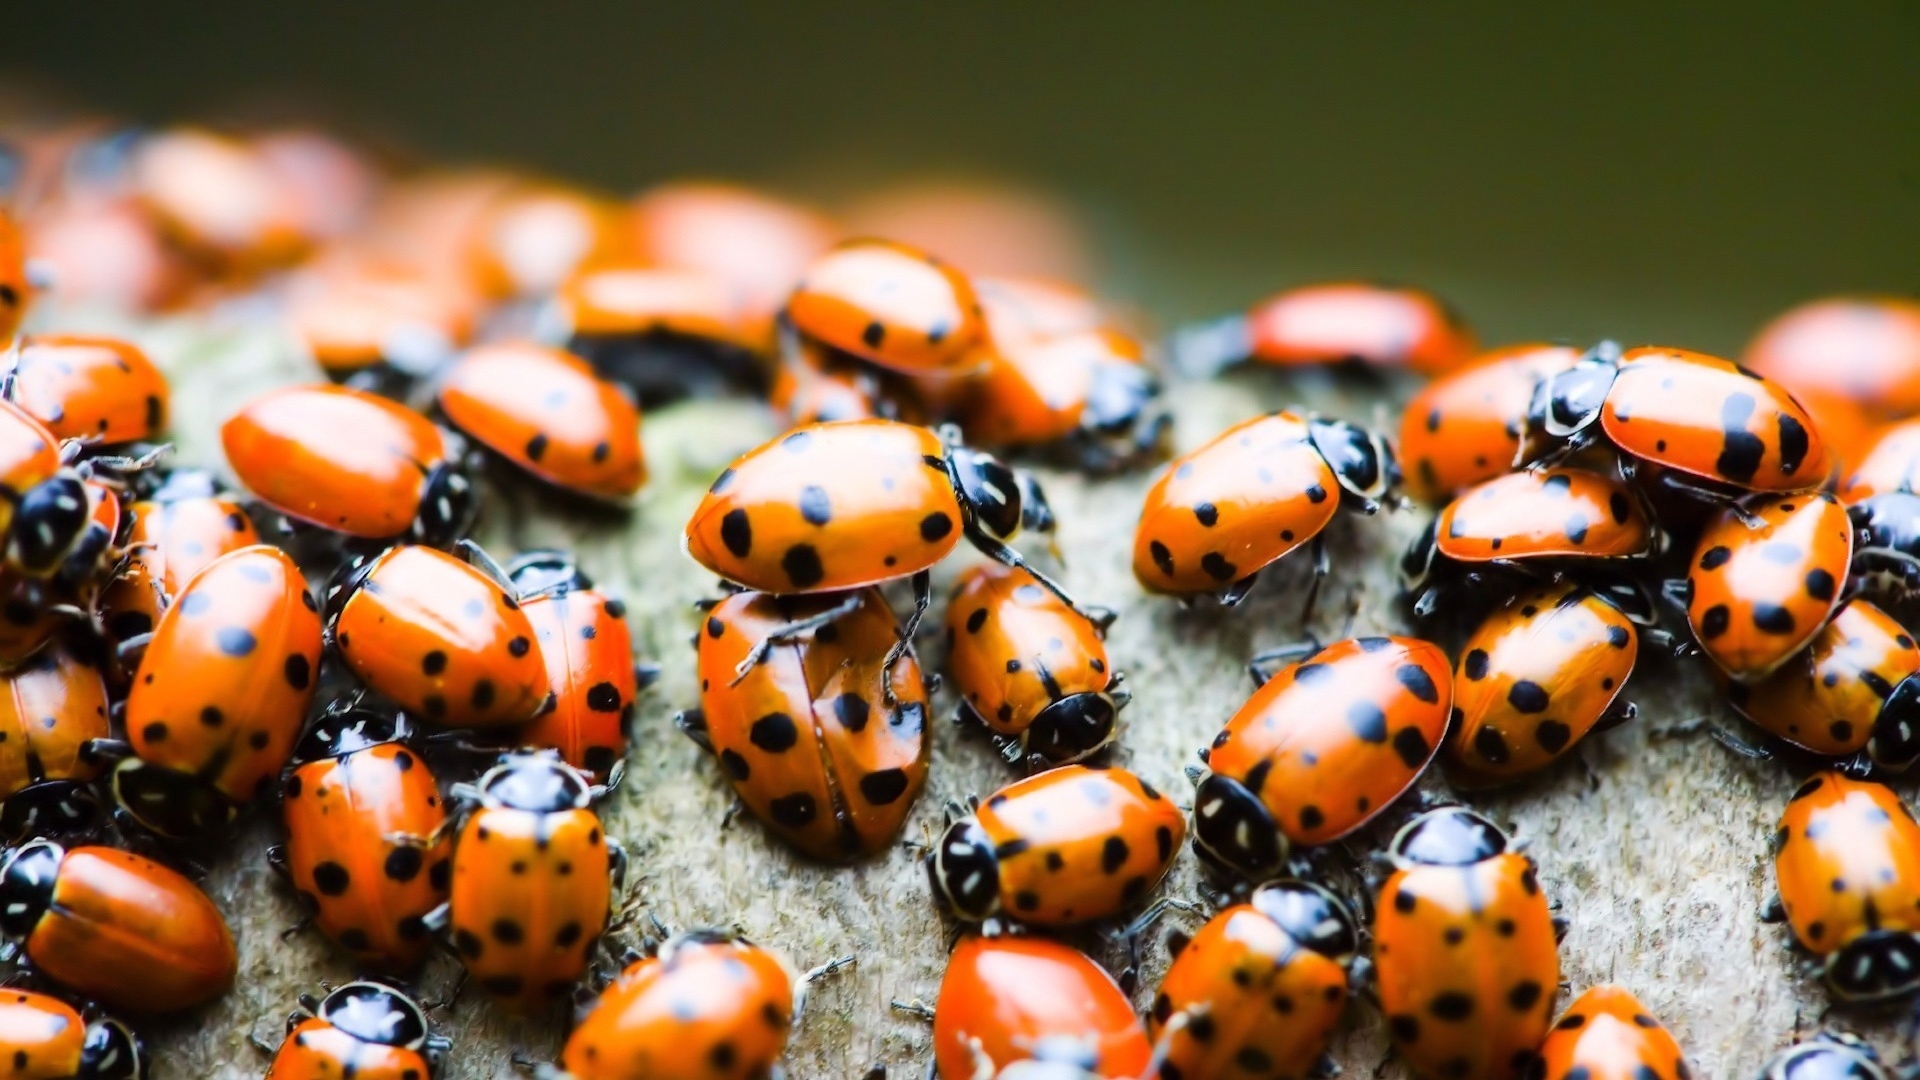 Lady bugs for 1920 x 1080 HDTV 1080p resolution